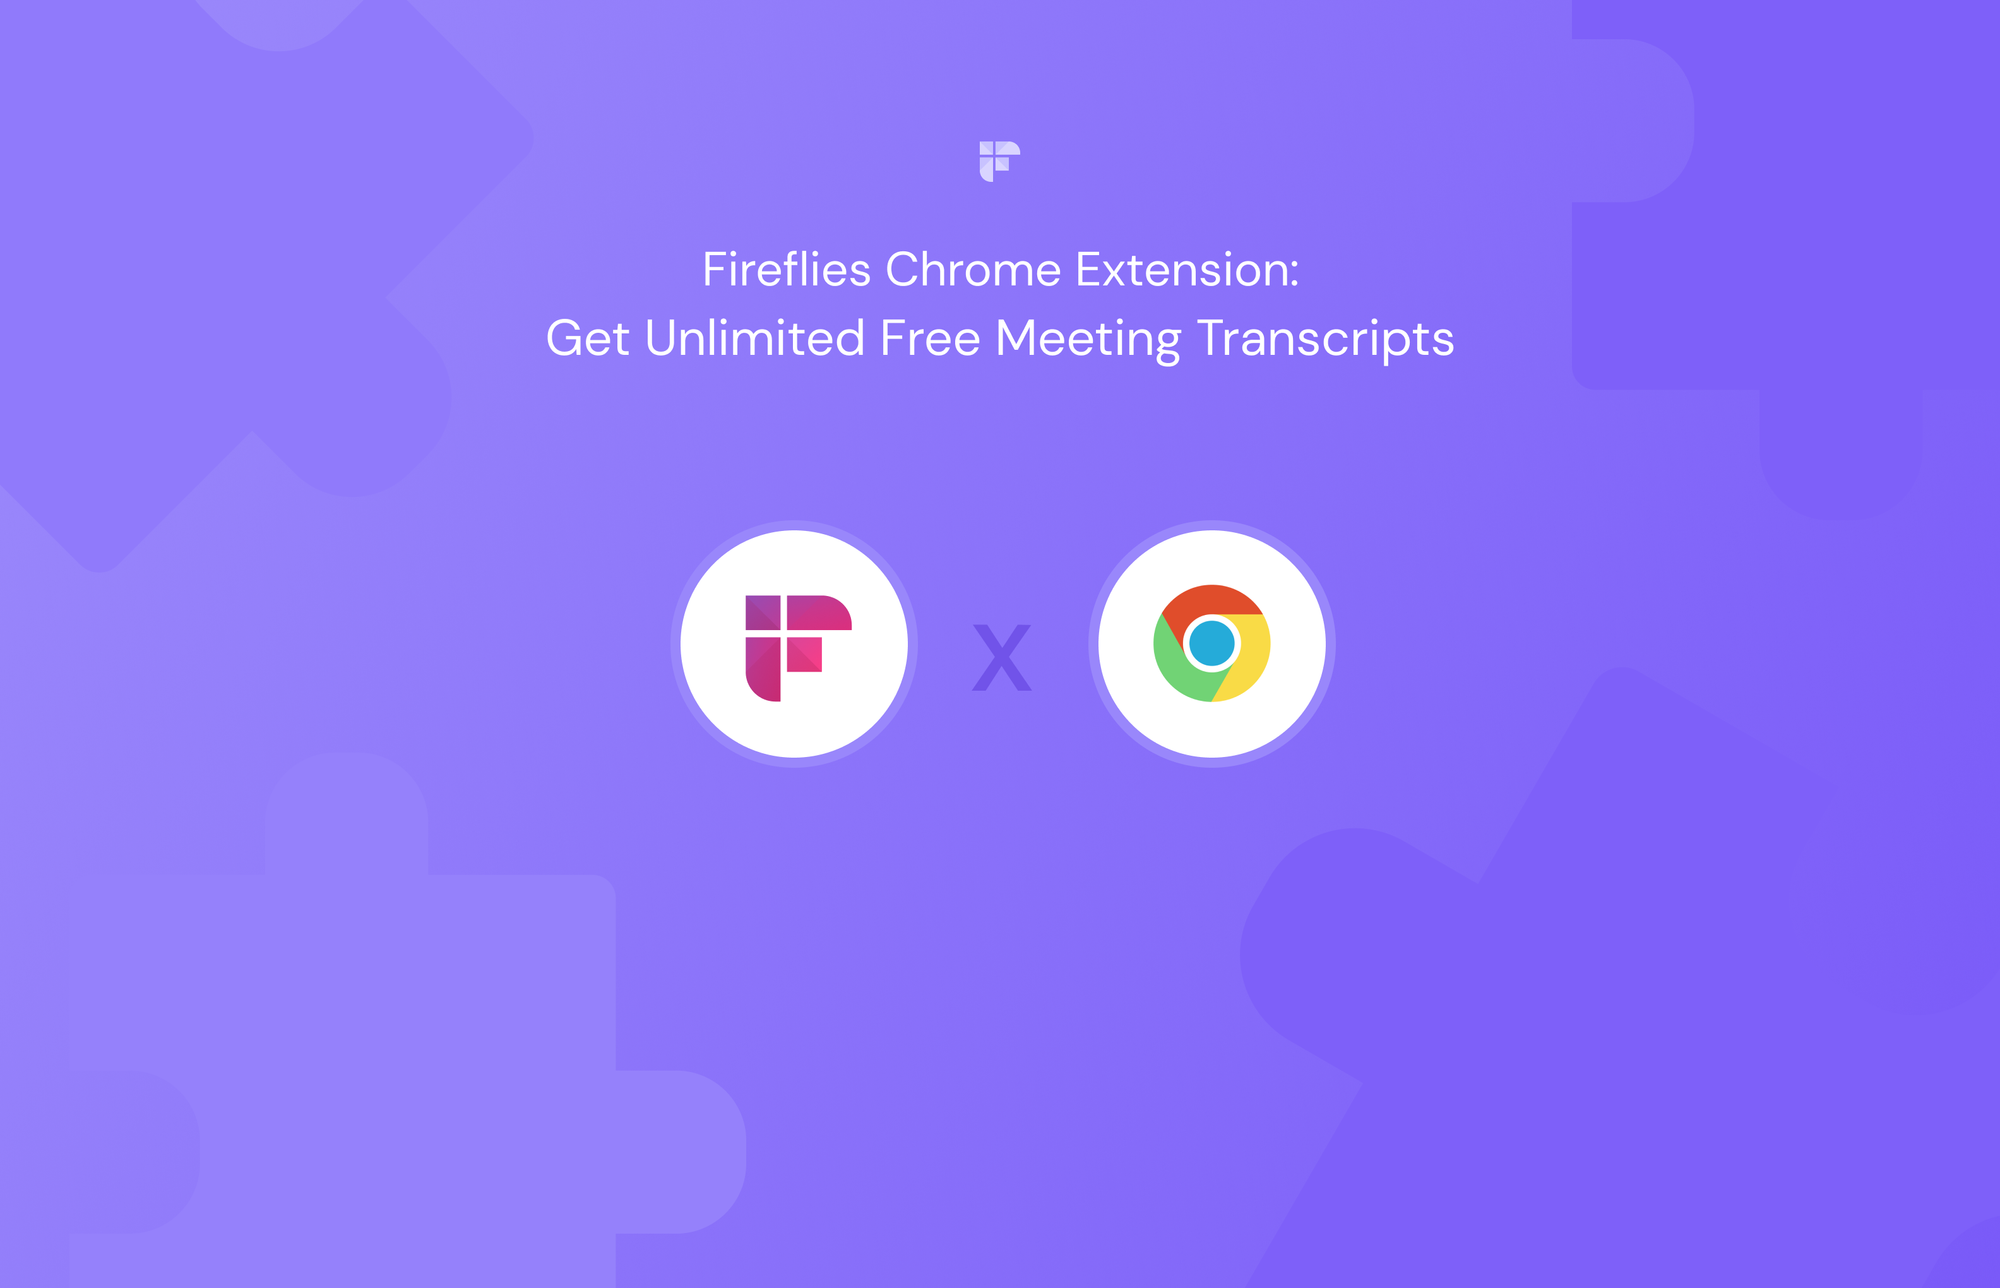 Fireflies Chrome Extension: Get Unlimited Free Meeting Transcripts